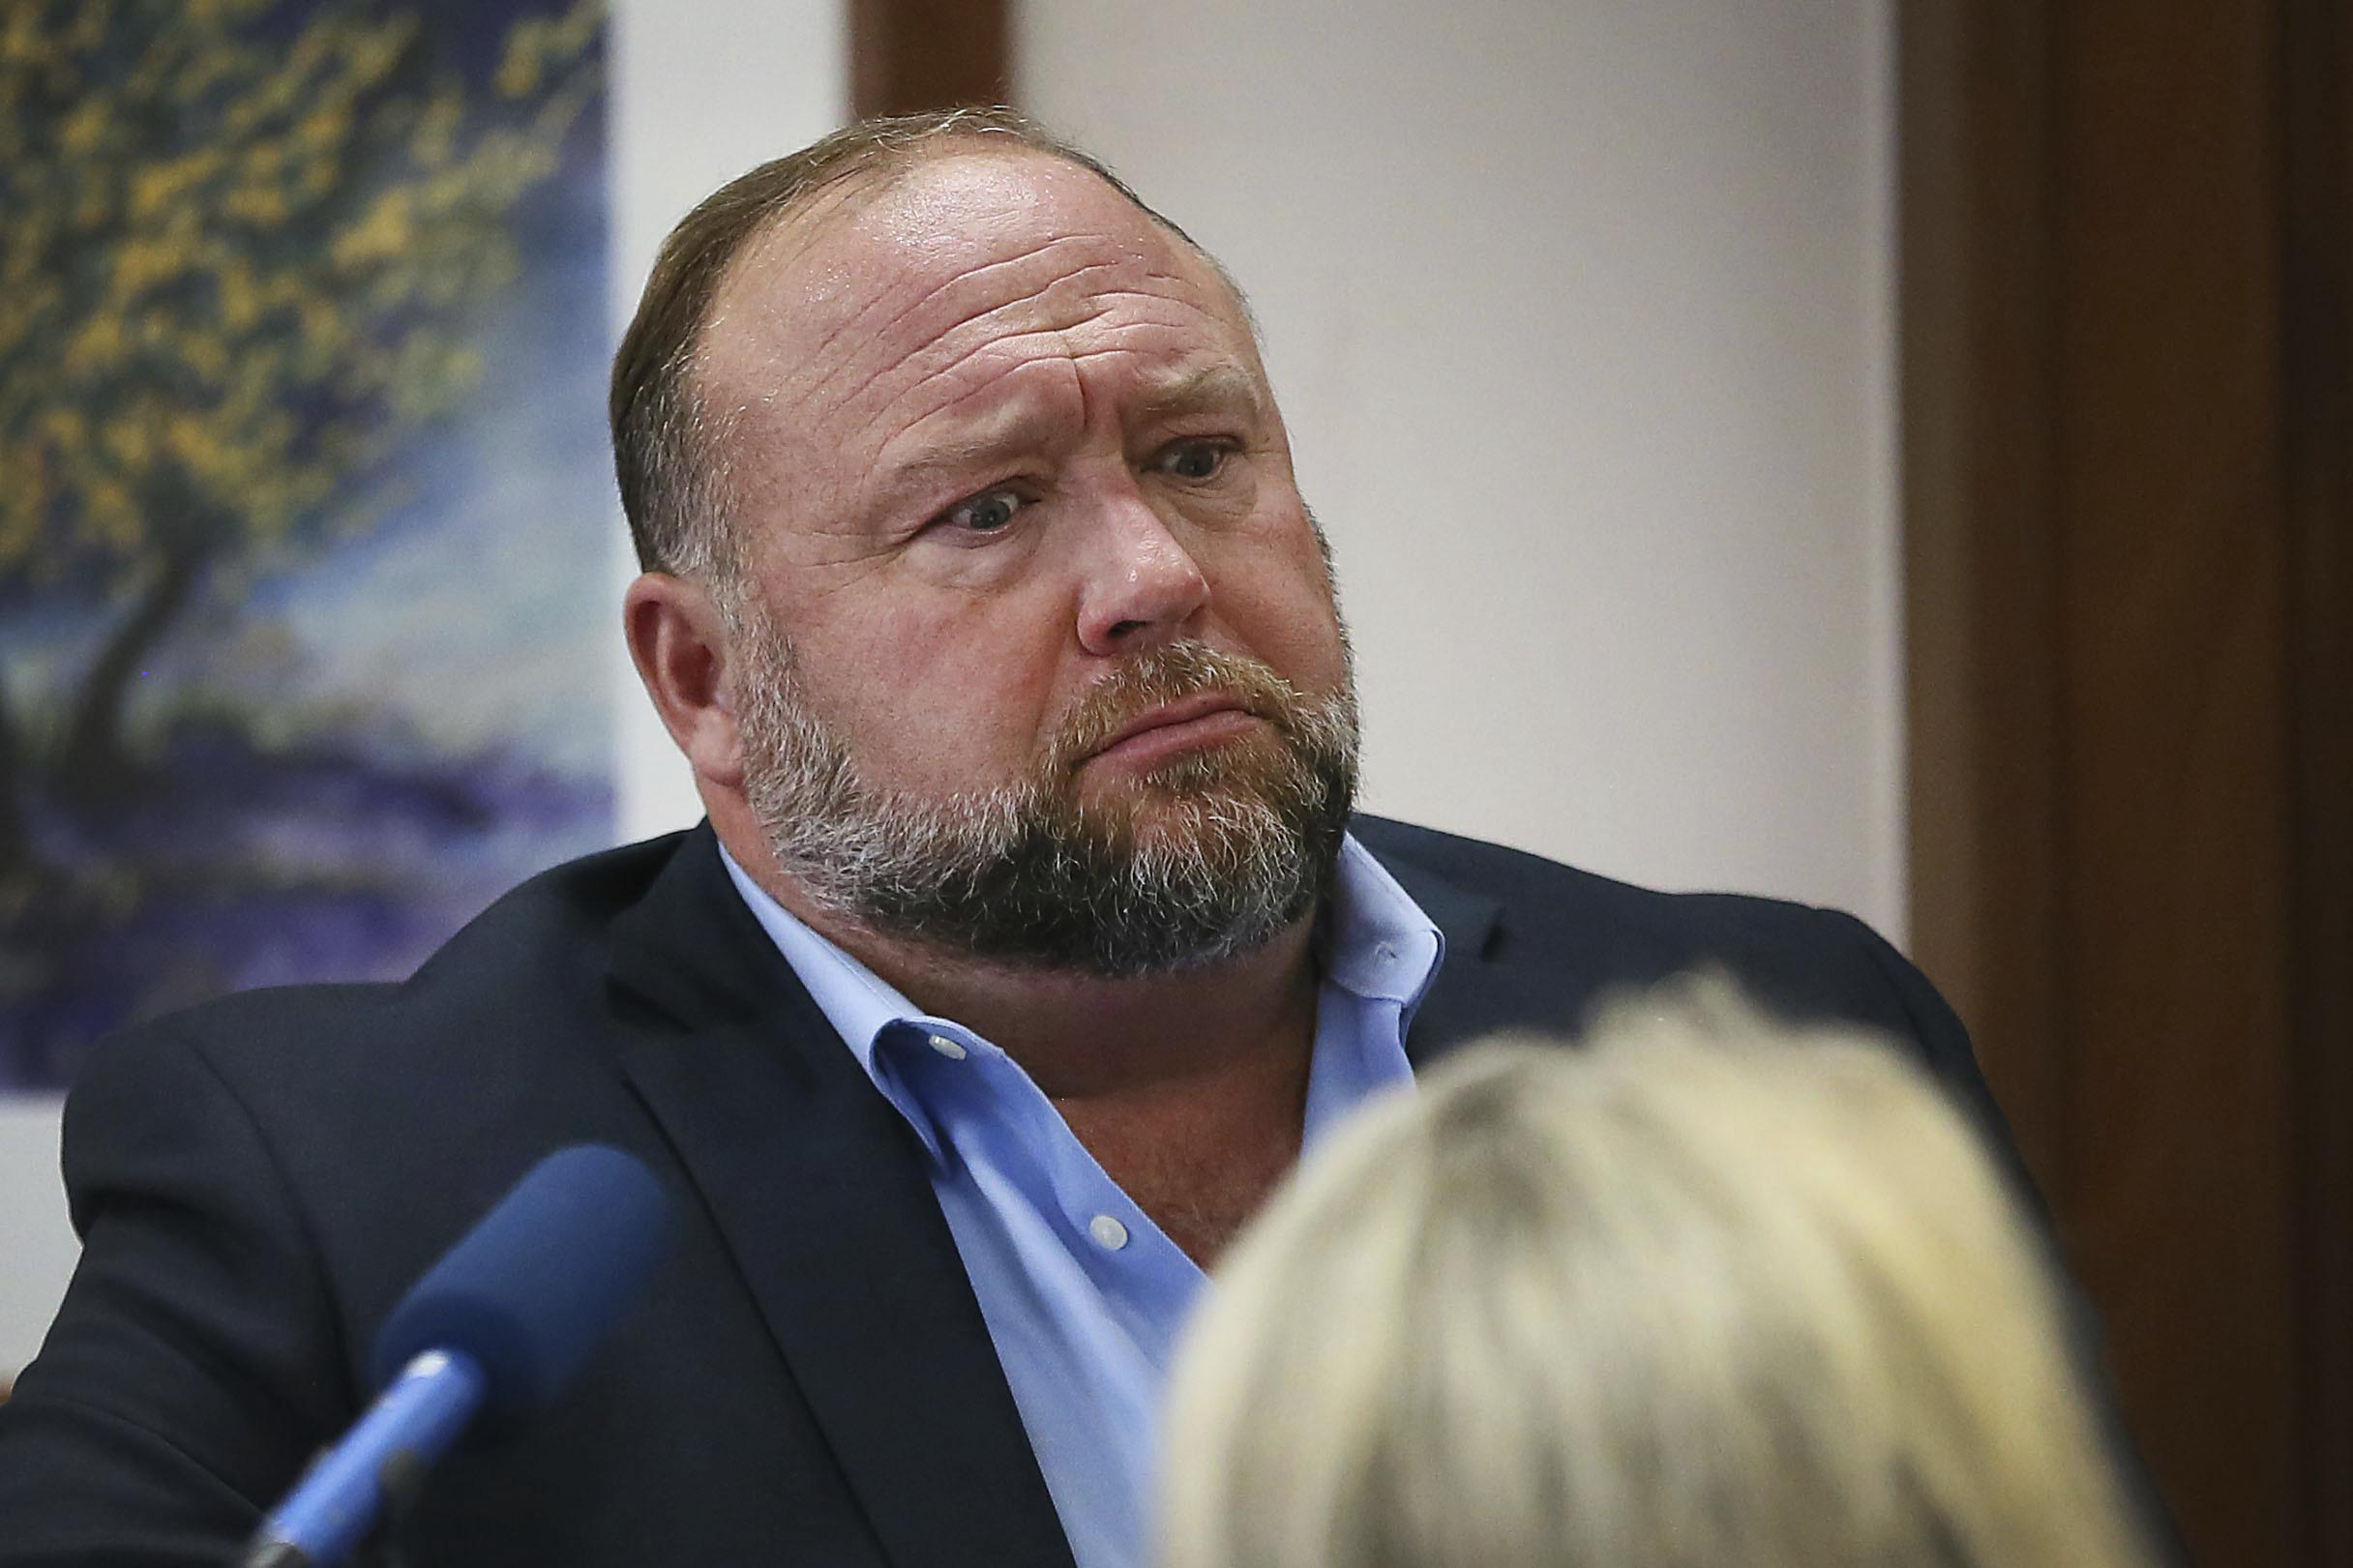 Alex Jones concedes Sandy Hook attack was ‘100% real’ – The Associated Press